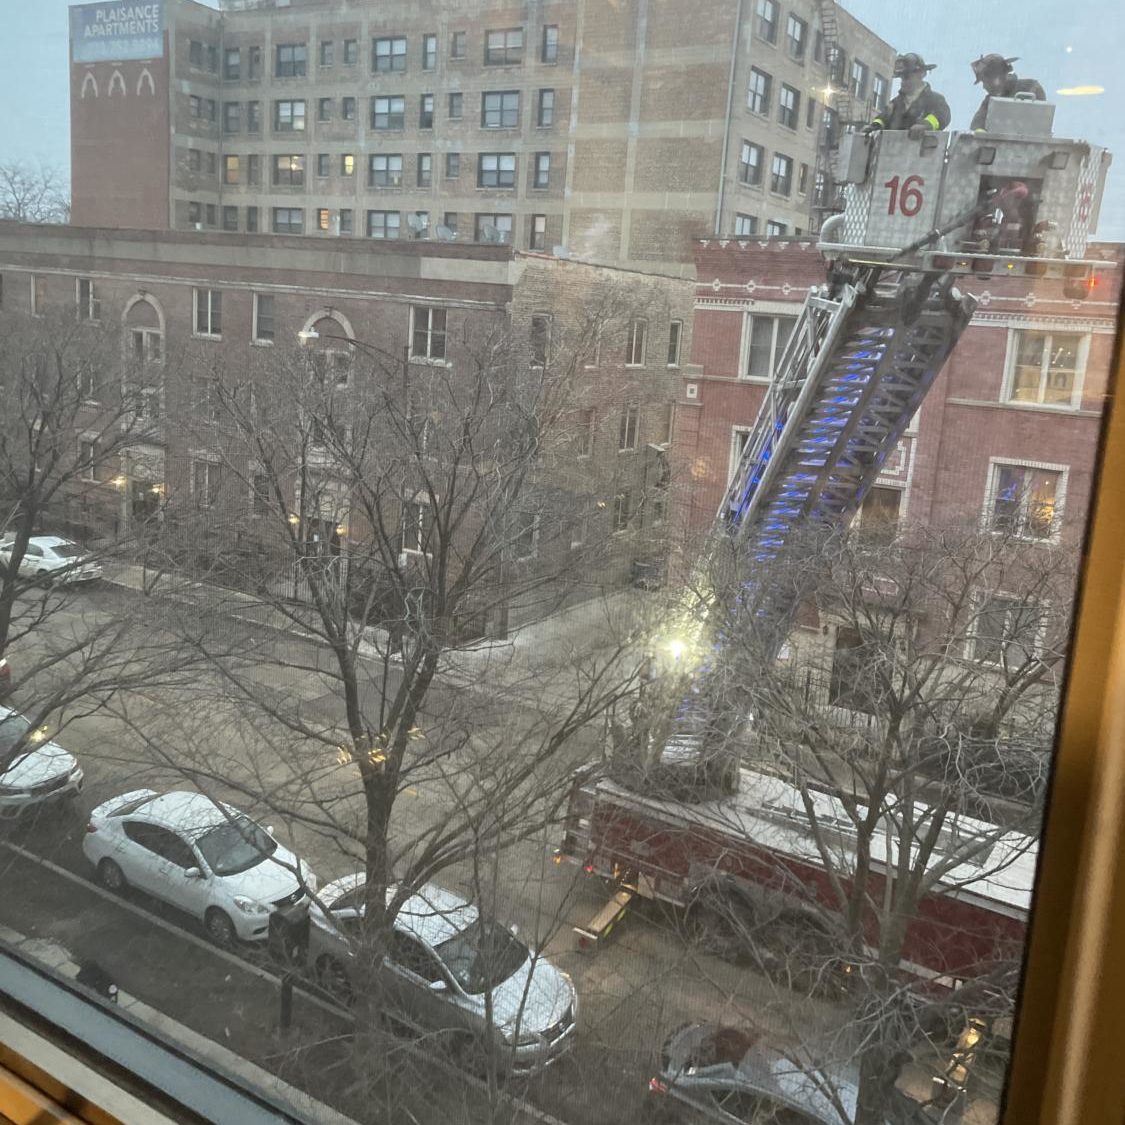 A view of a fire truck, with the ladder extended upward, on East 61st Street from a room in Woodlawn Residential Commons